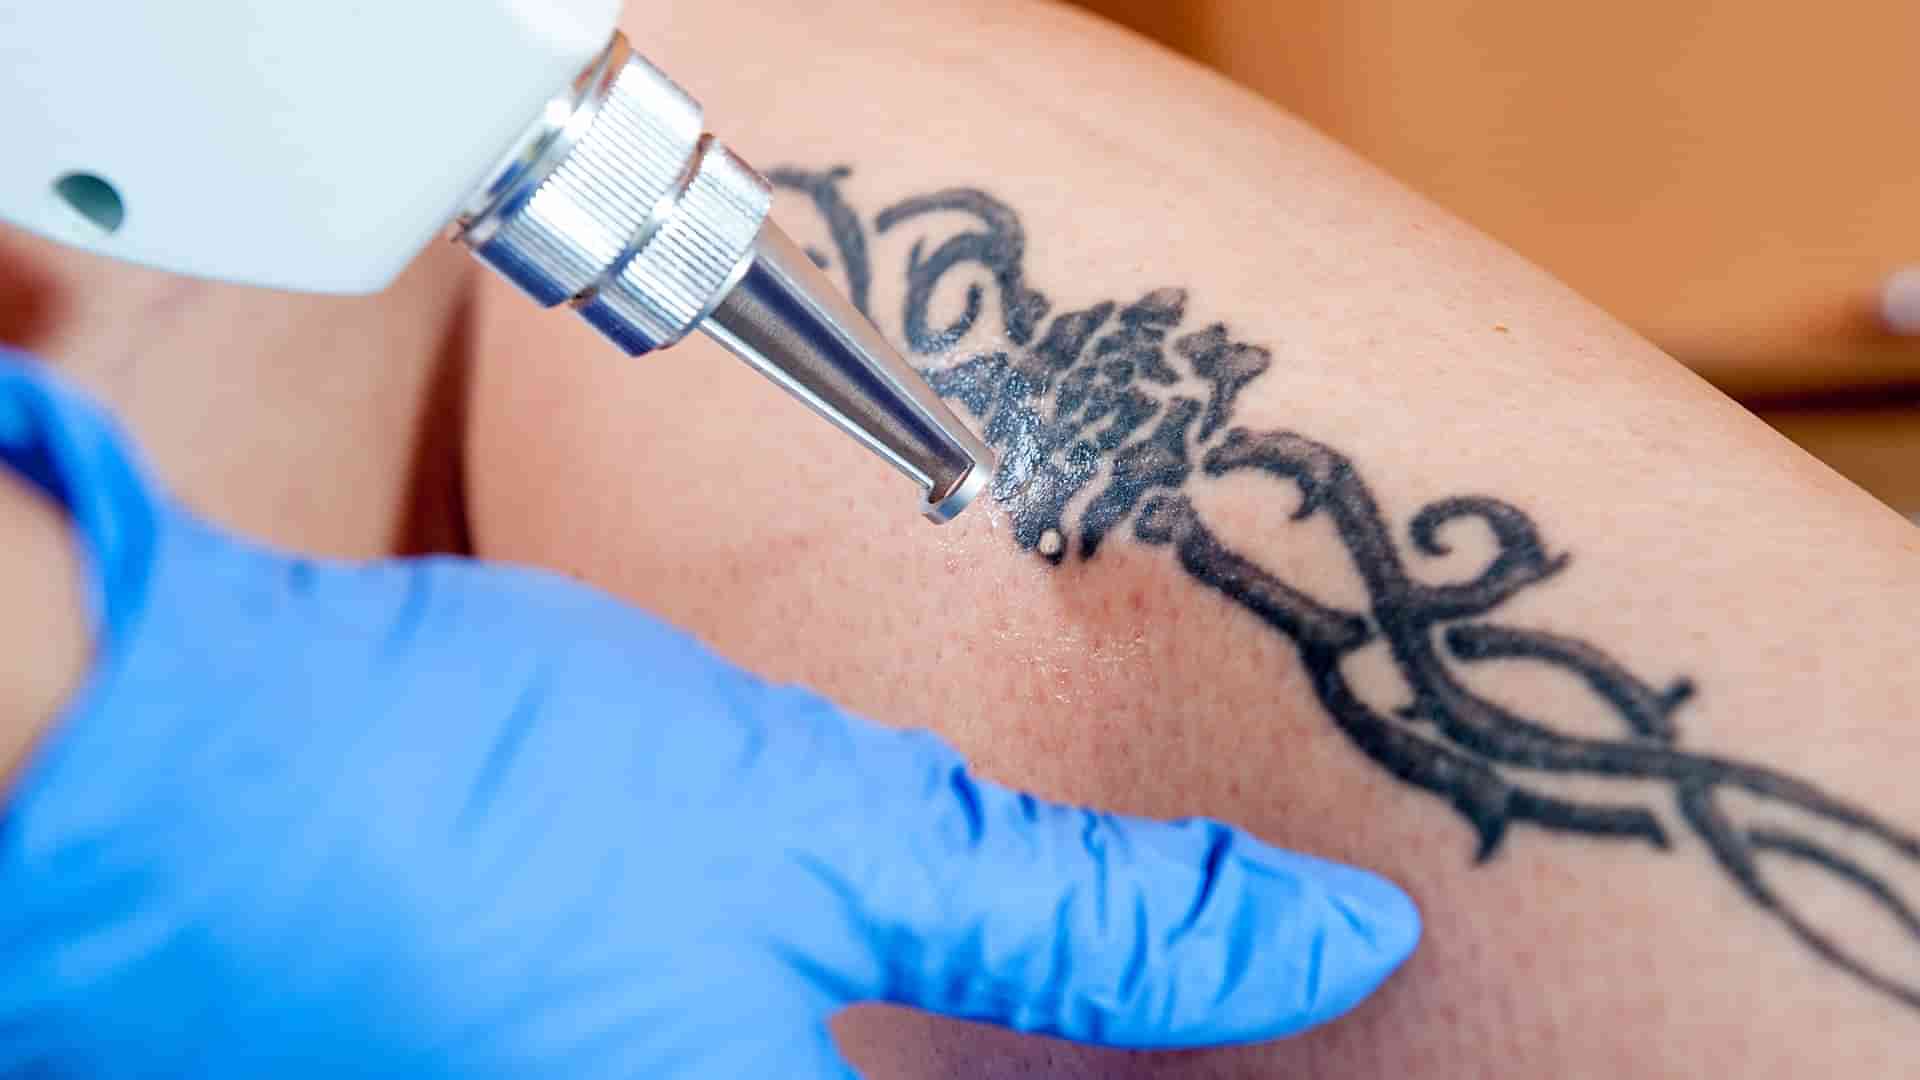 Tattoo Removal Contraindications & After Care